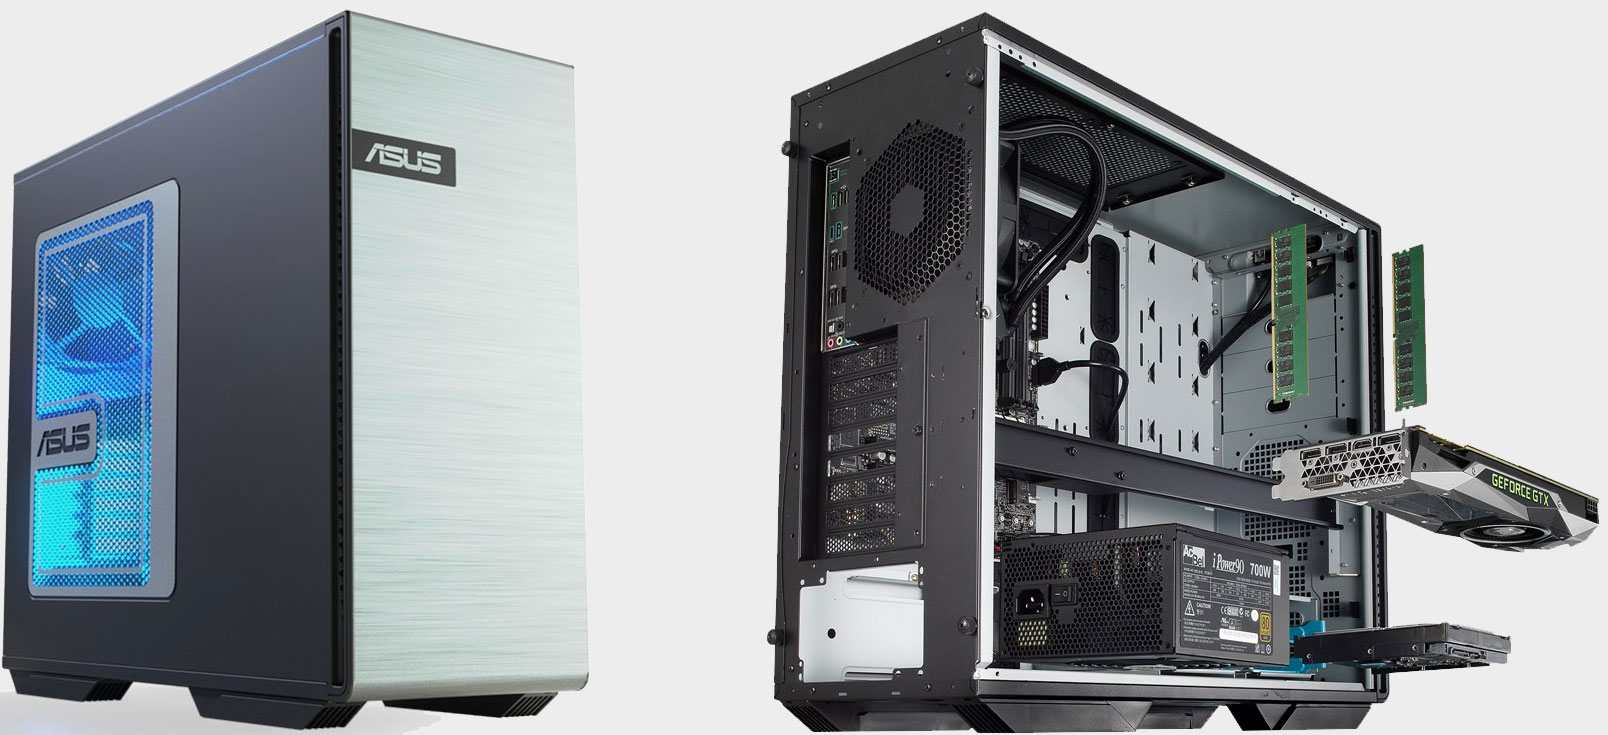 This desktop PC pairs a 10-core Xeon CPU with RTX graphics for 